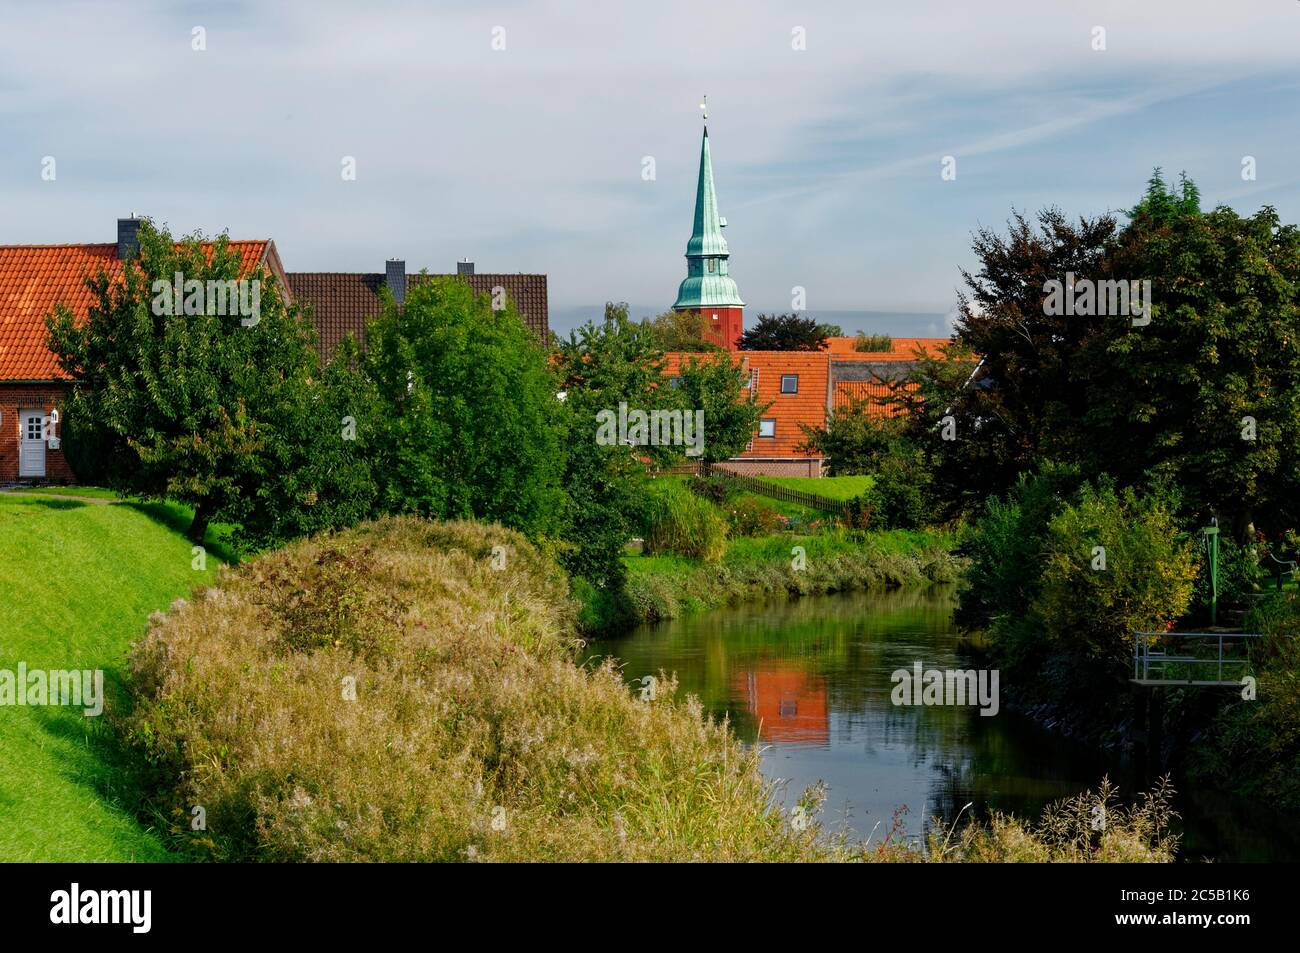 Steinkirchen in Altes Land: View with river Lühe and steeple of church St. Martini et Nicola, district of Stade, Lower Saxony, Germany Stock Photo